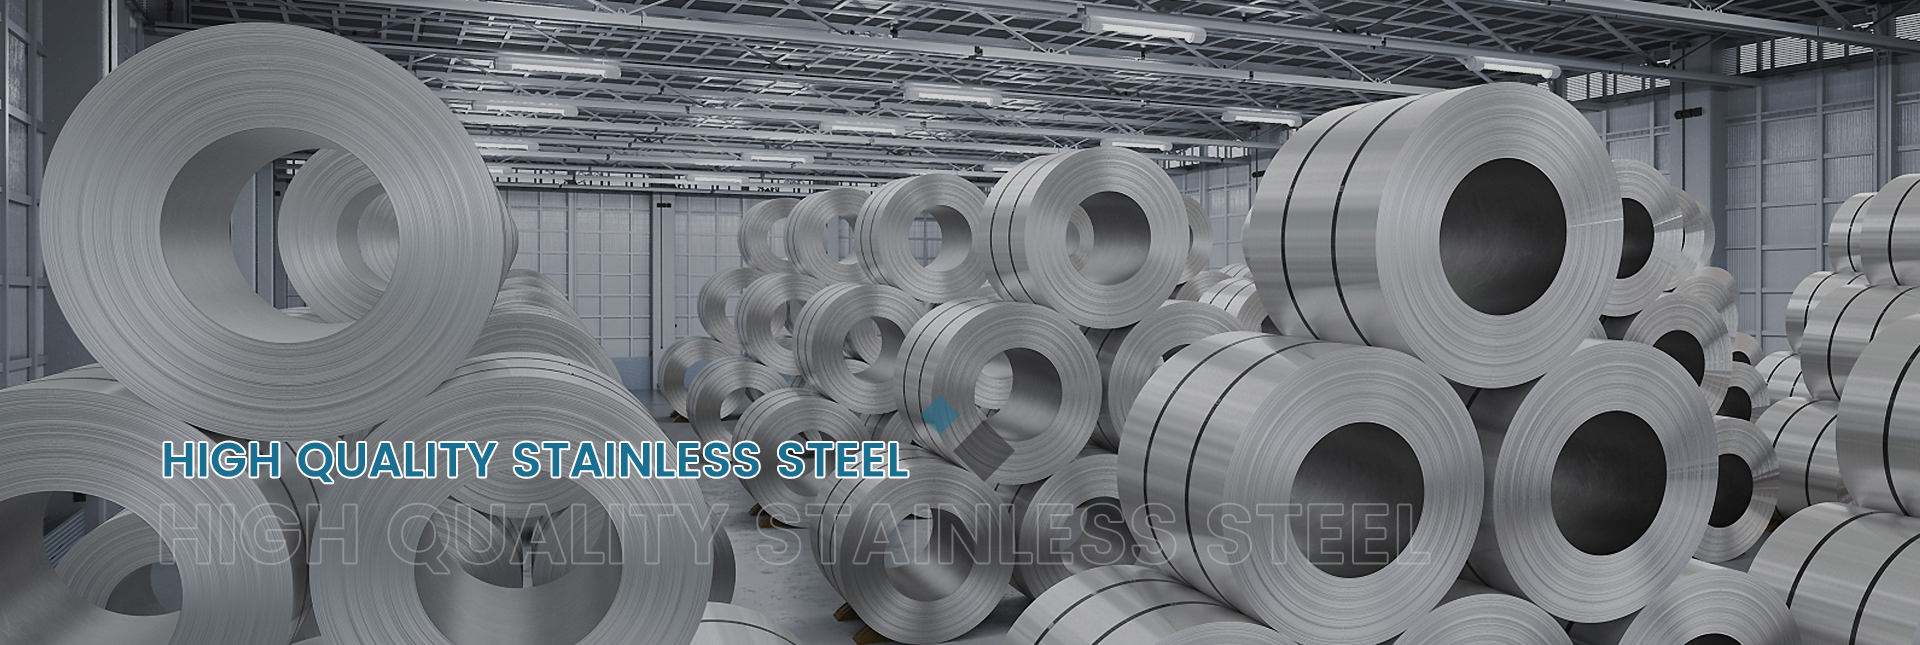 Stainless Steel Coil, Stainless Steel Pipe, Stainless Steel Round Bar - Henghangbang